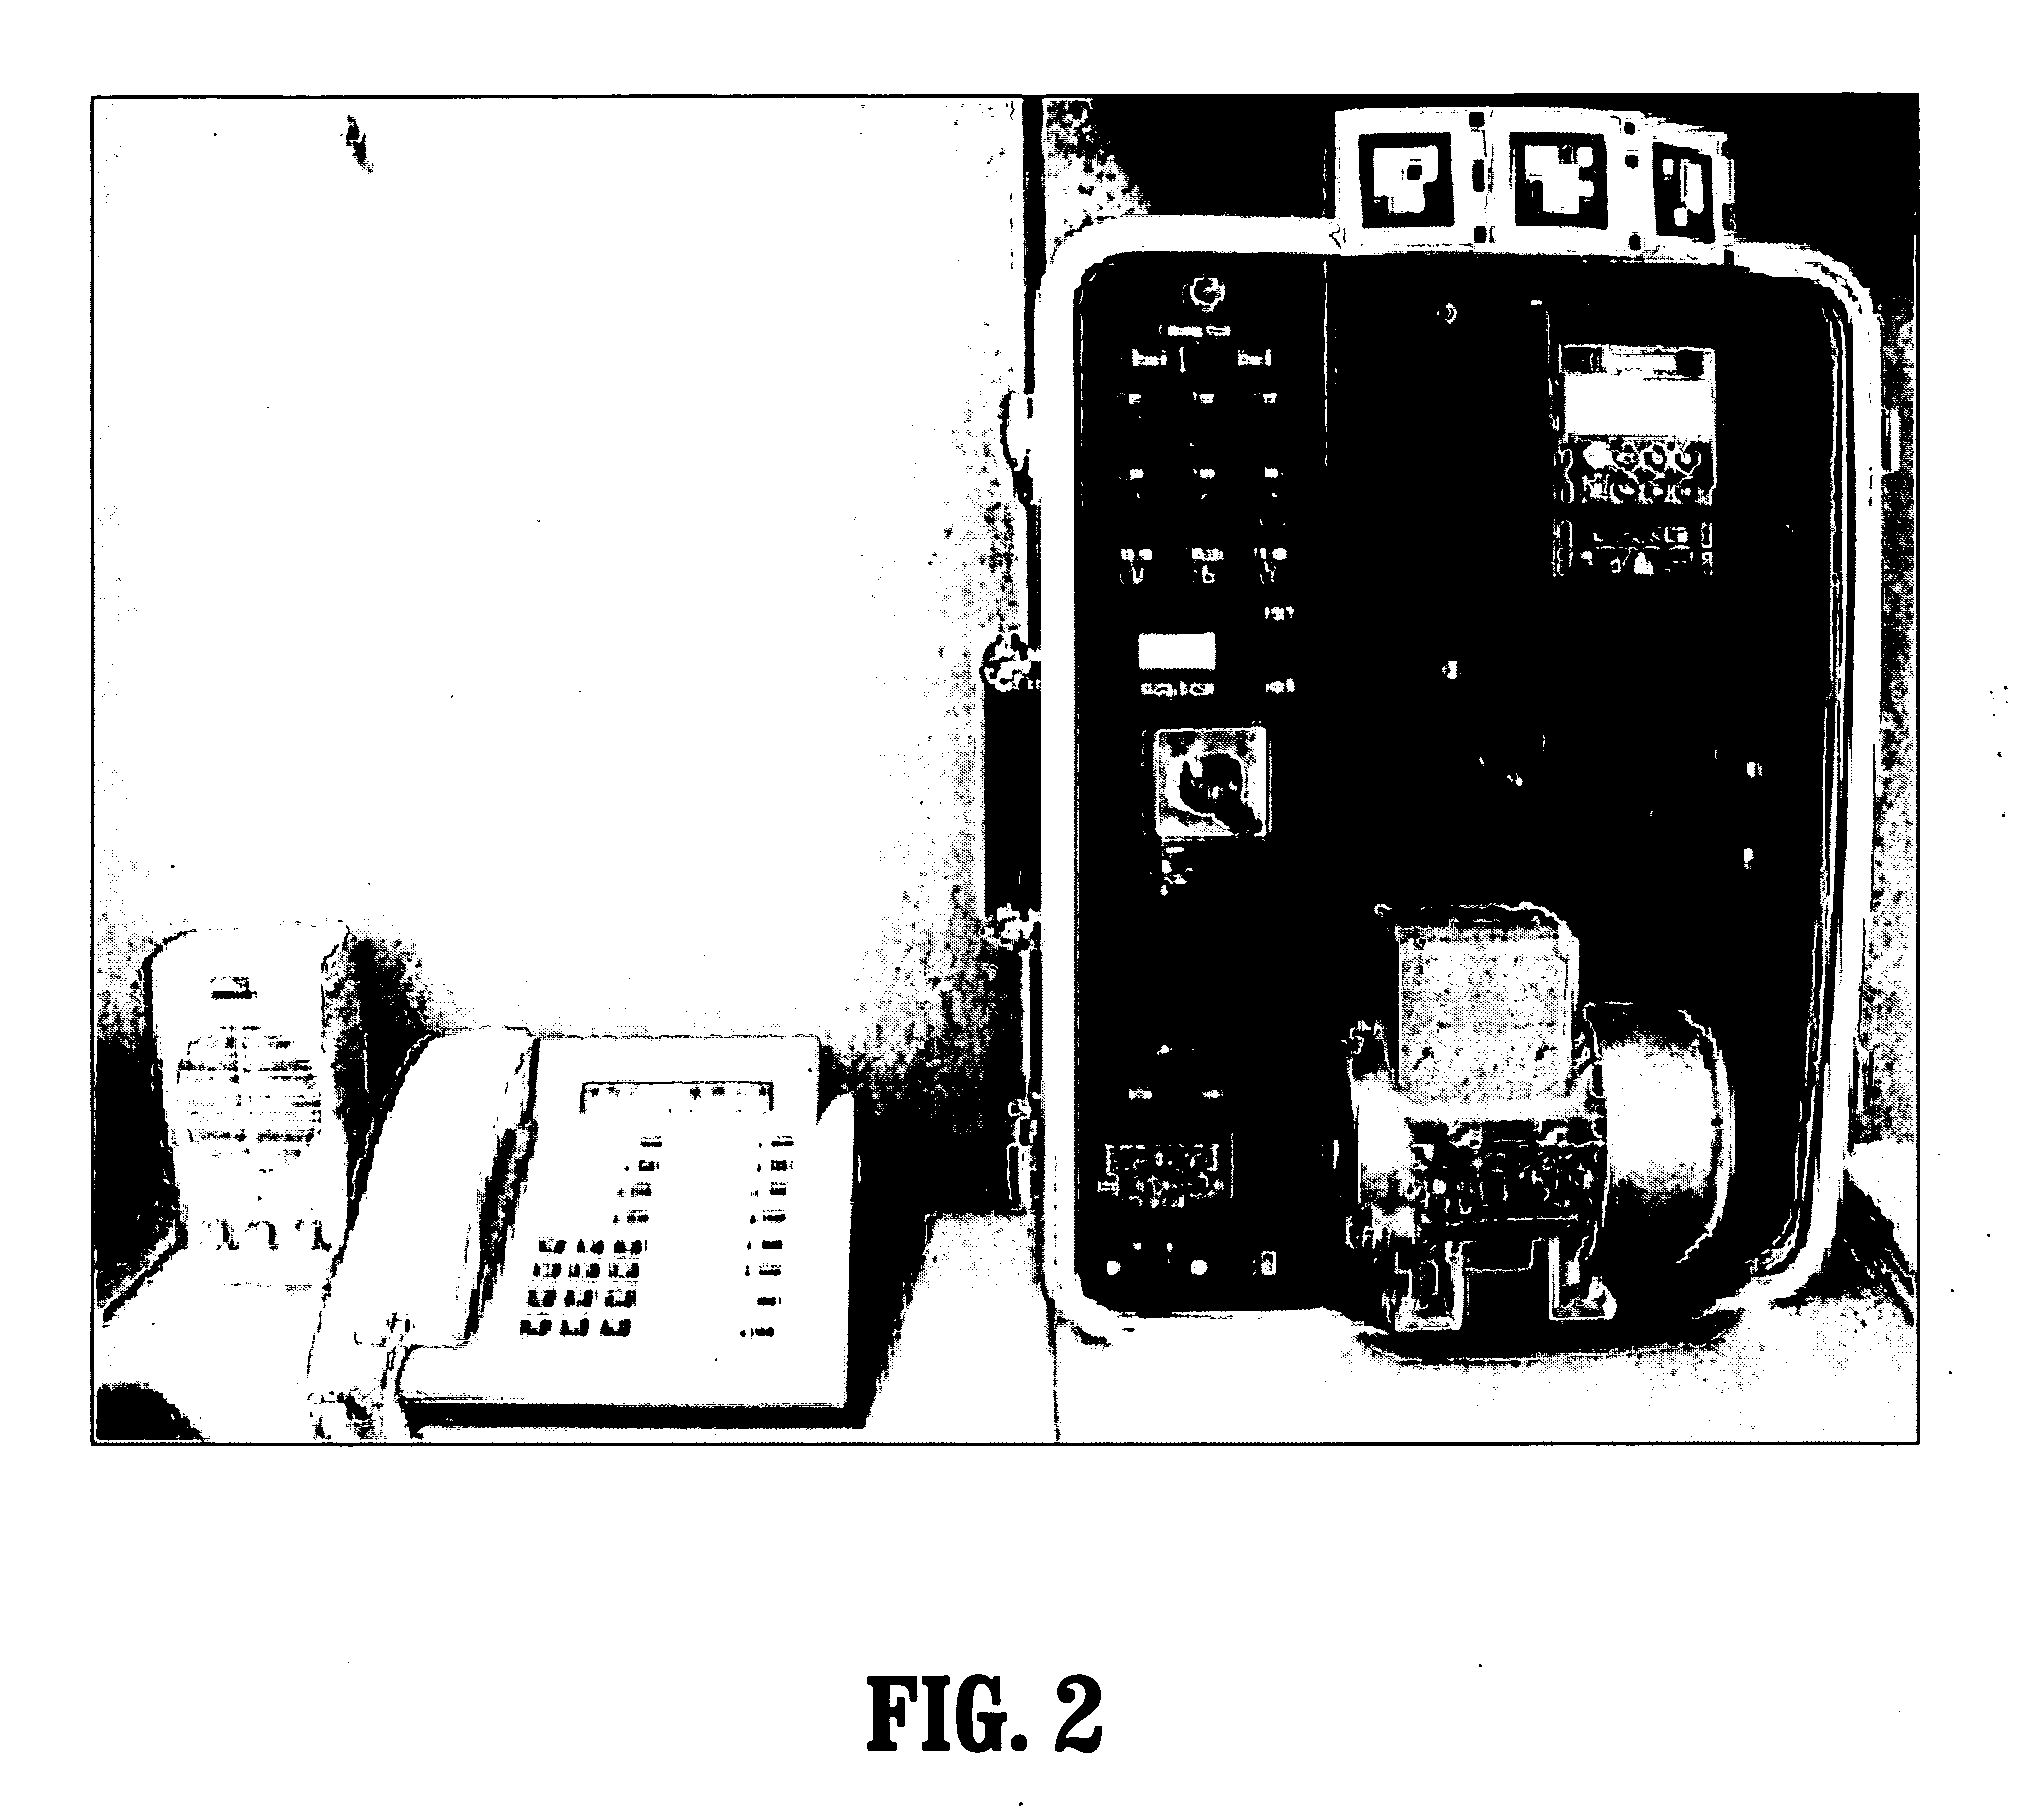 System and method for camera tracking and pose estimation